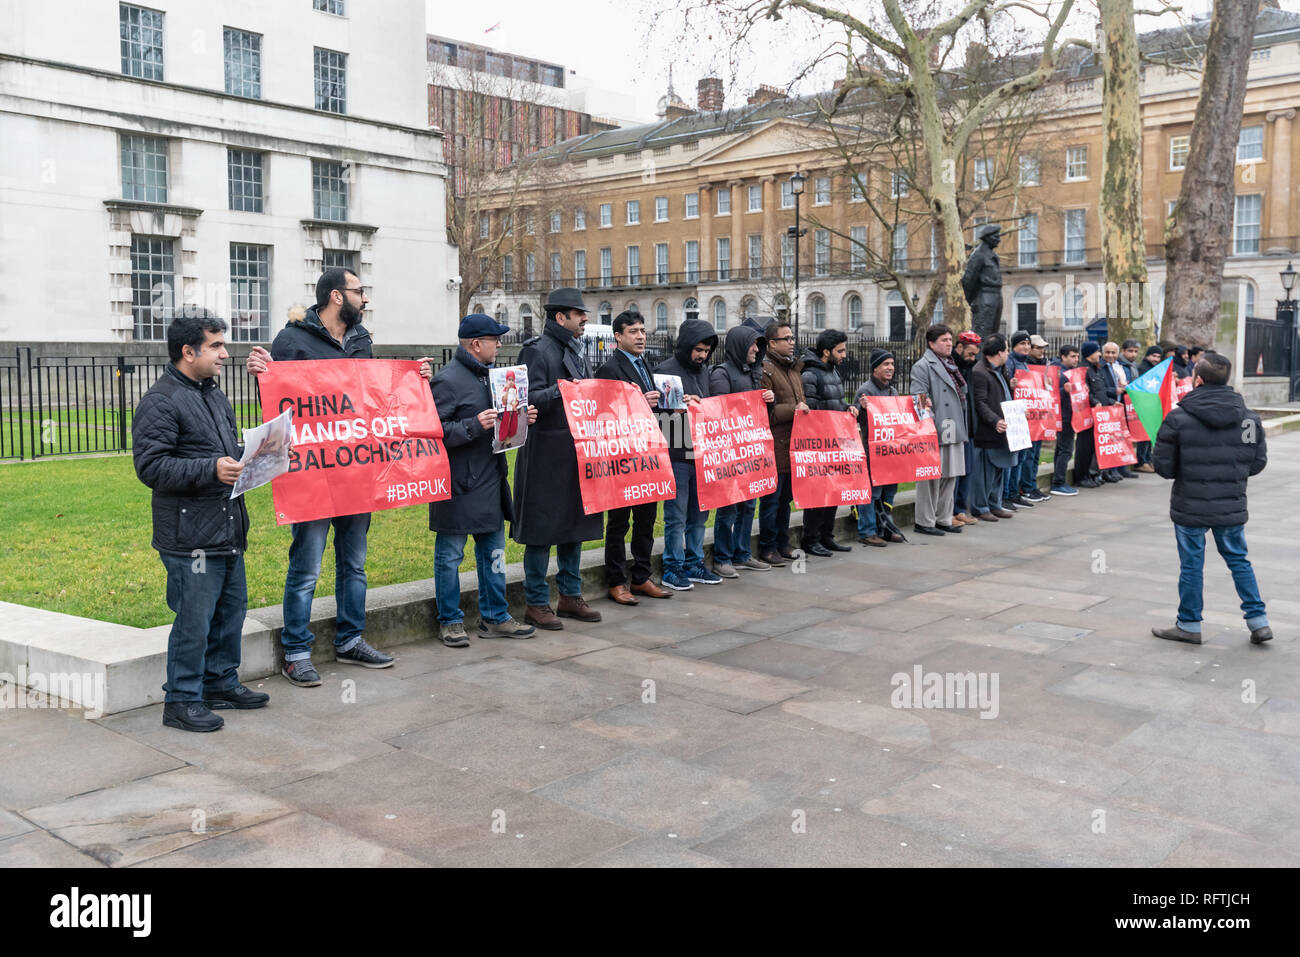 London, UK. 26th January 2019. The Baloch Republican Party UK protested opposite Downing St demanding the release of missing persons in Balochistan, abducted by the Pakistan army and to support the mothers and sisters of missing persons on hunger strike in the Quetta Press Club. They say Baloch people from every intellectual field are being abducted and mutilated dead bodies being discovered on a daily basis. Balochistan is the largest of Pakistan's four provinces and its incorporation into Pakistan was highly contested after independence. Credit: Peter Marshall/Alamy Live News Stock Photo